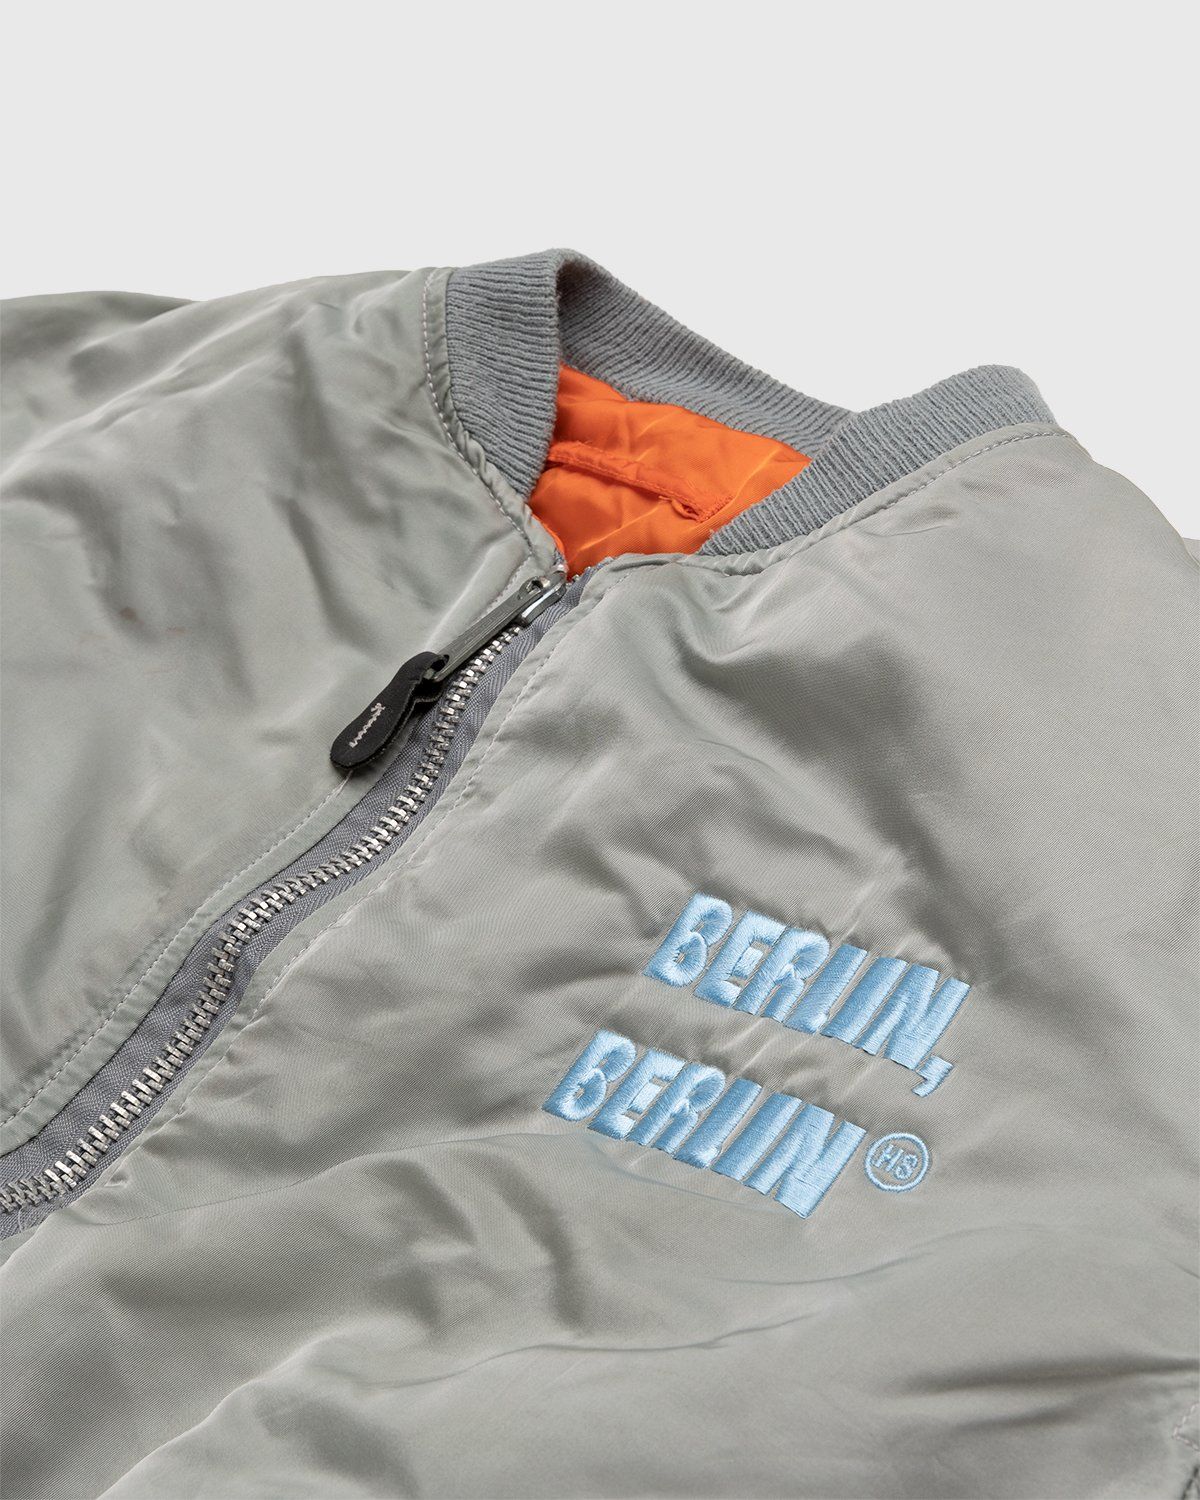 Highsnobiety – Berlin Berlin Embroidered Vintage MA-1 Grey - Outerwear - Grey - Image 4